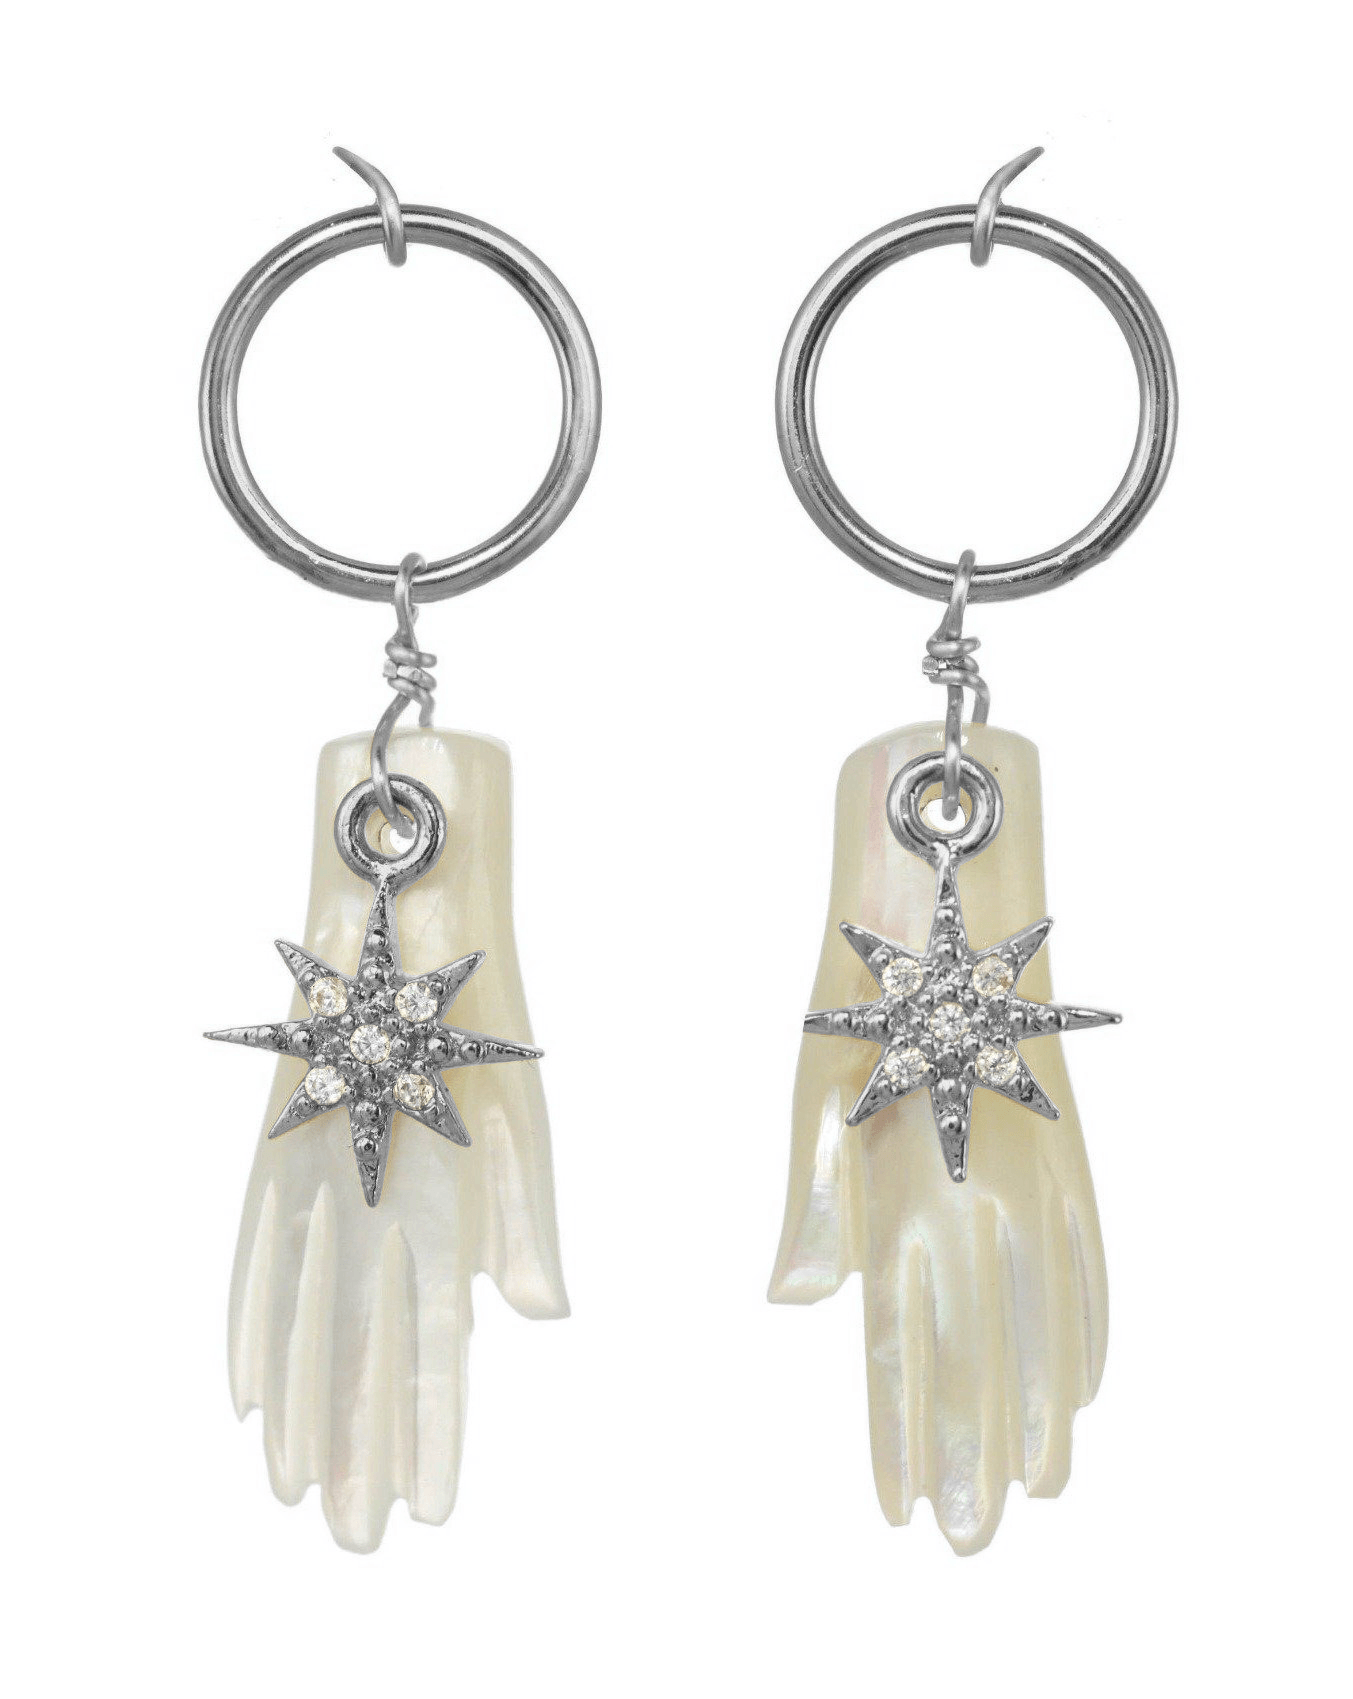 Astra Earrings by KOZAKH. Dangling earrings in Sterling Silver, featuring a hand carved Mother of Pearl hand charm and a Cubic Zirconia star charm.